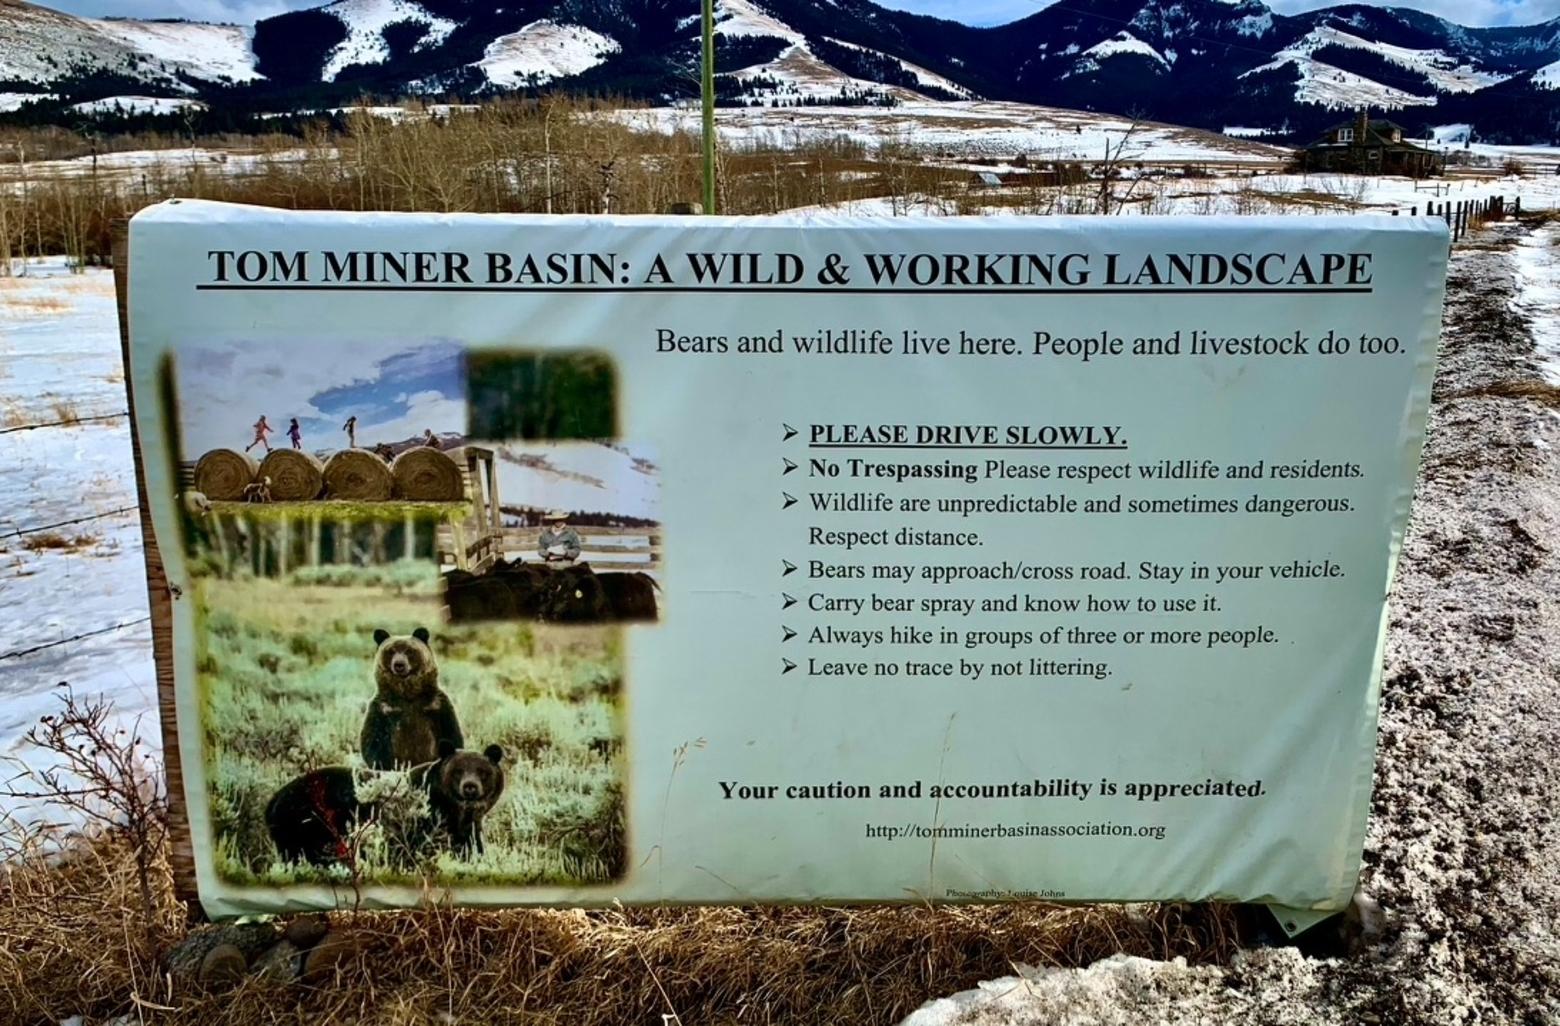 The residents of Tom Miner Basin have done everything they can to amicably encourage responsible behavior on the part of visitors, but politeness does not always work. Lots of times, human and financial resources have been expended to promote good behavior. One positive thing readers can do is contribute to the Tom Miner Basin Association. Photo by Todd Wilkinson